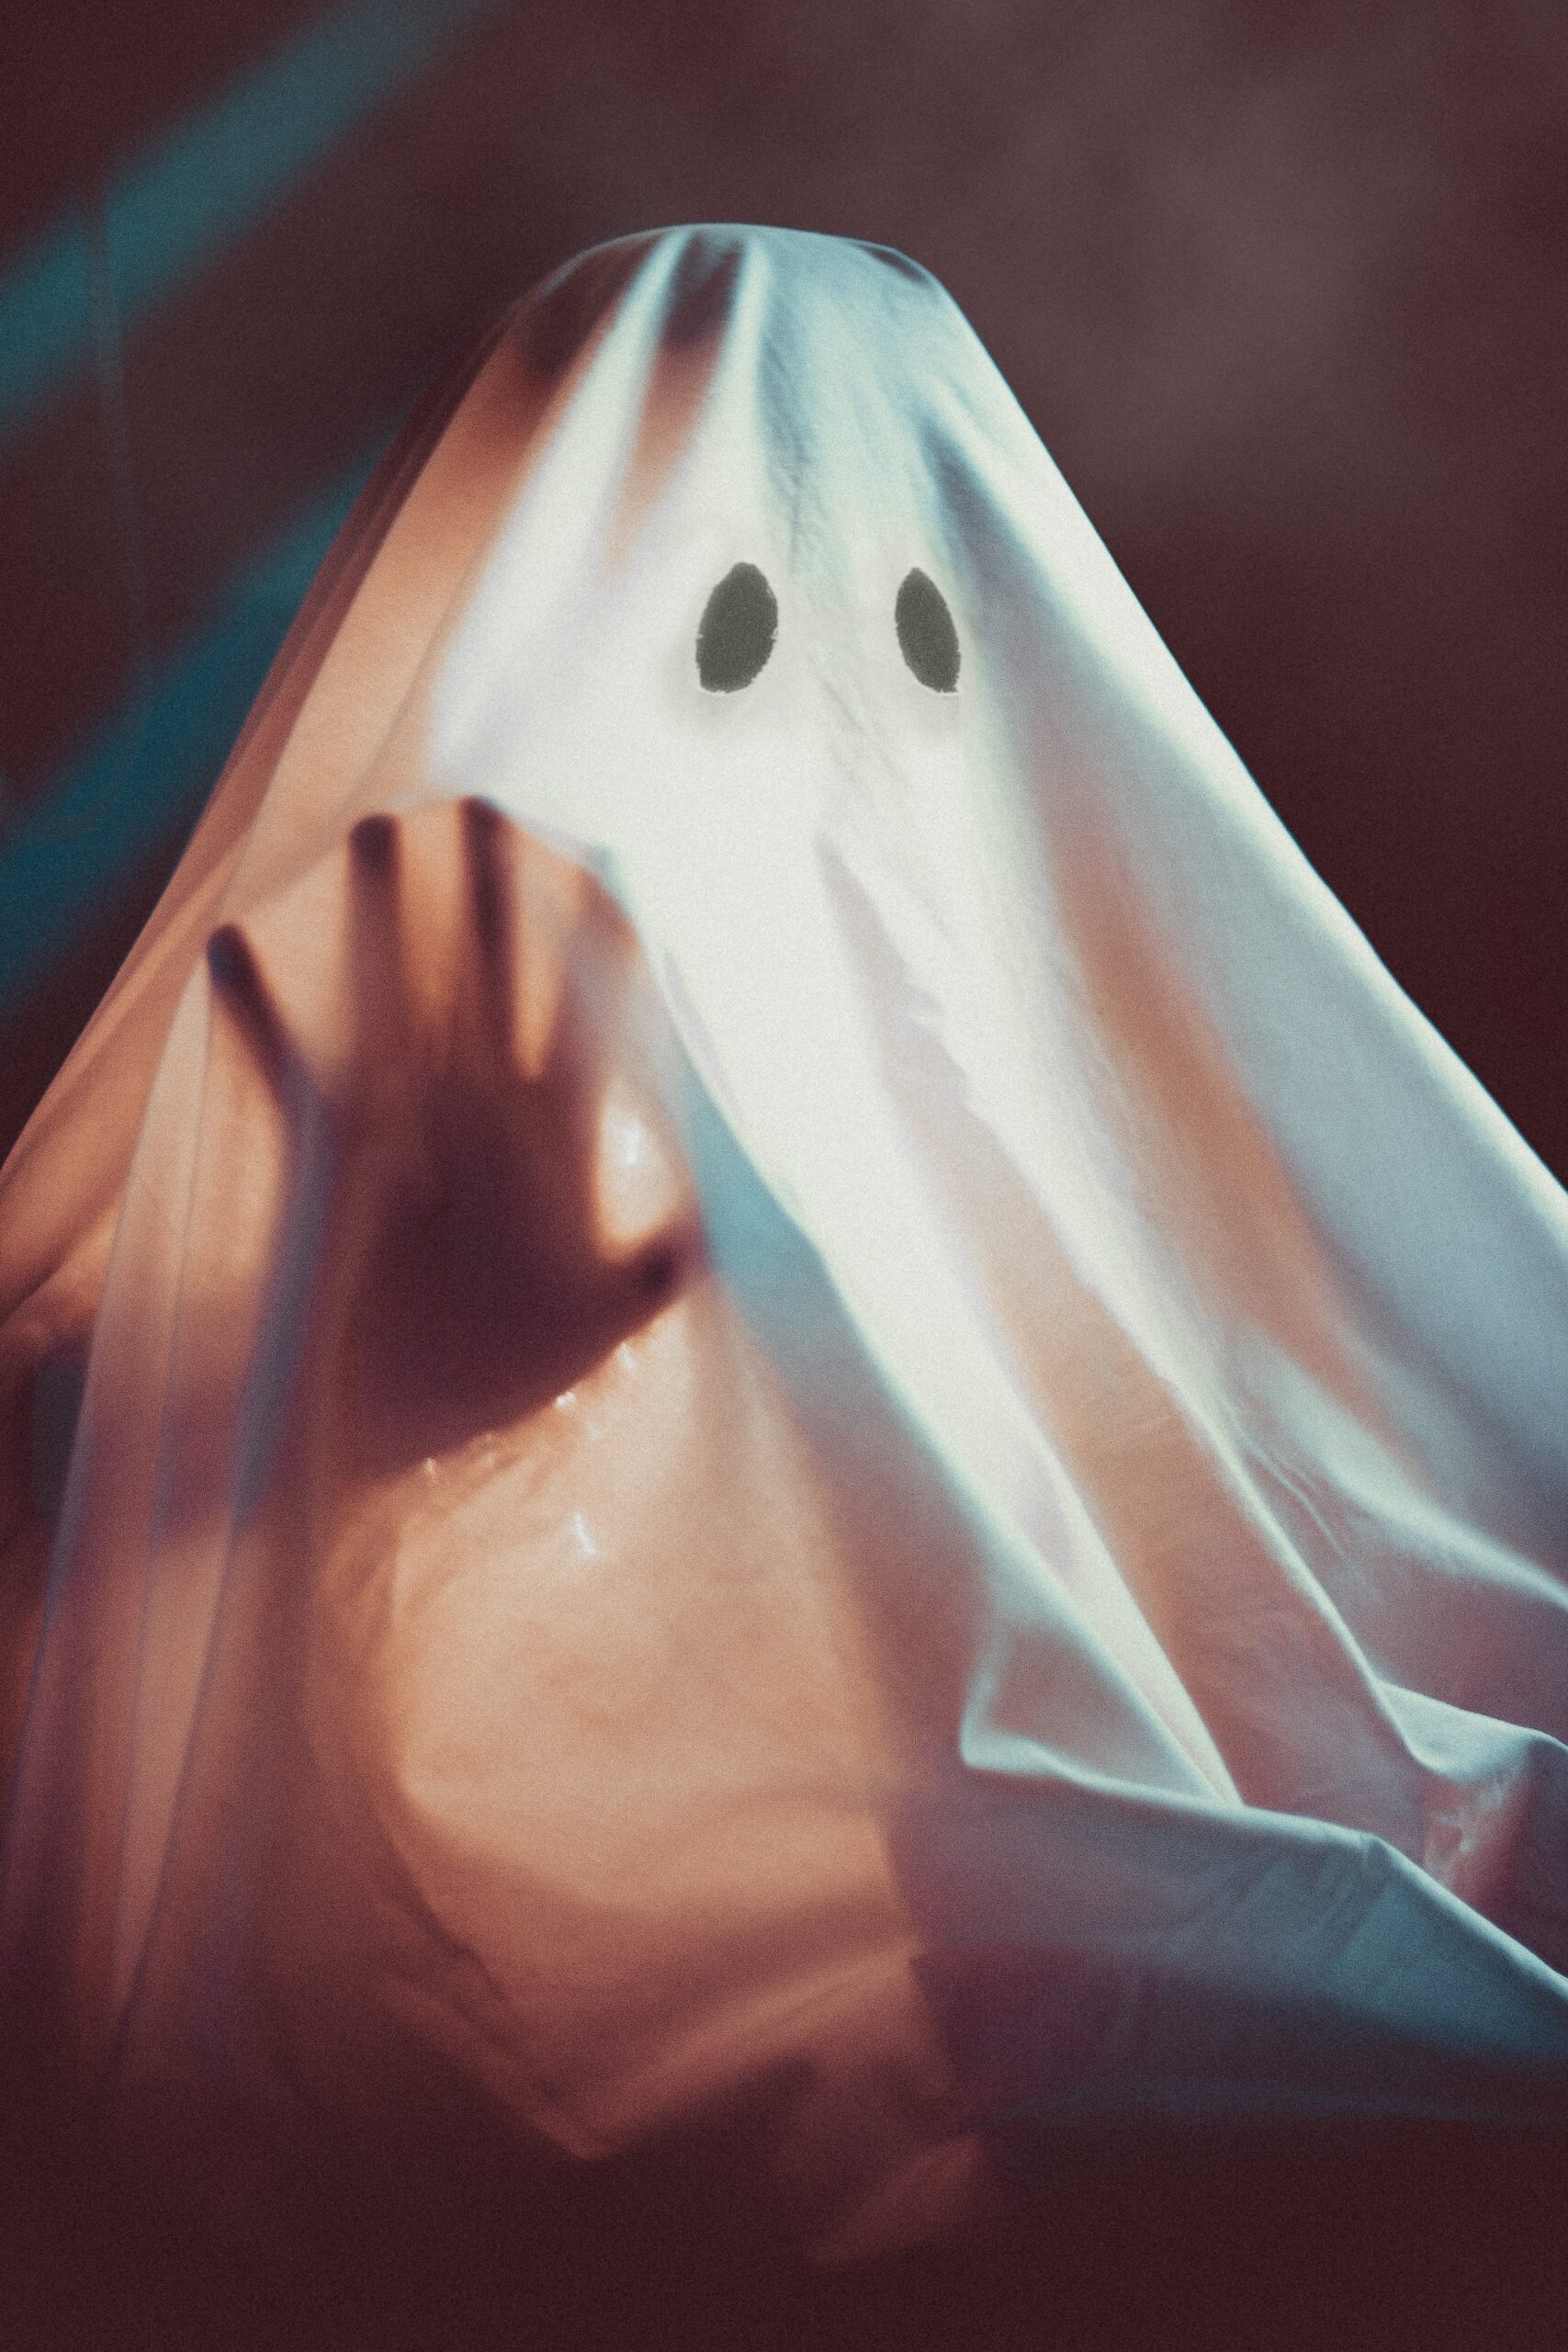 Someone dressed up as a ghost.